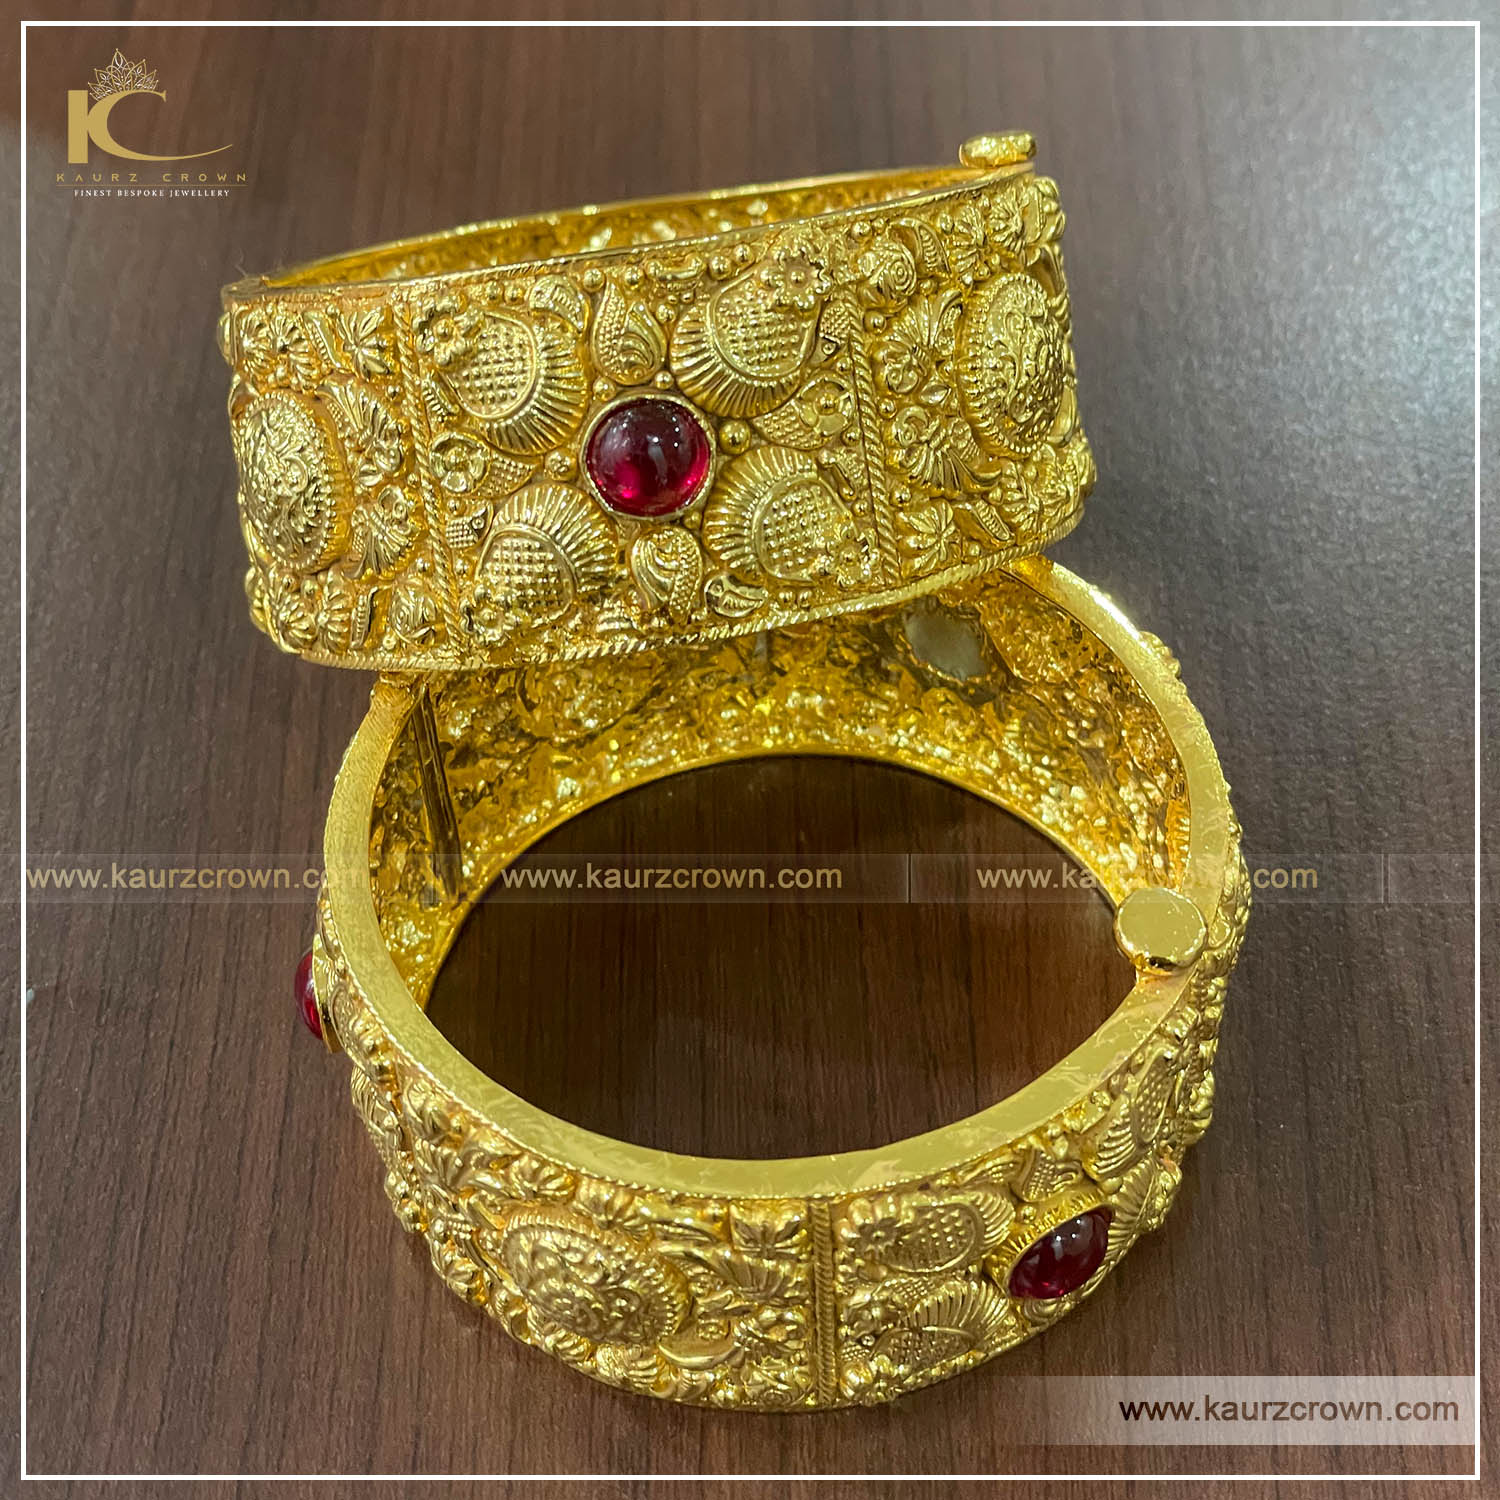 Ruksaba Traditional Antique Gold Plated Bangles – KaurzCrown.com